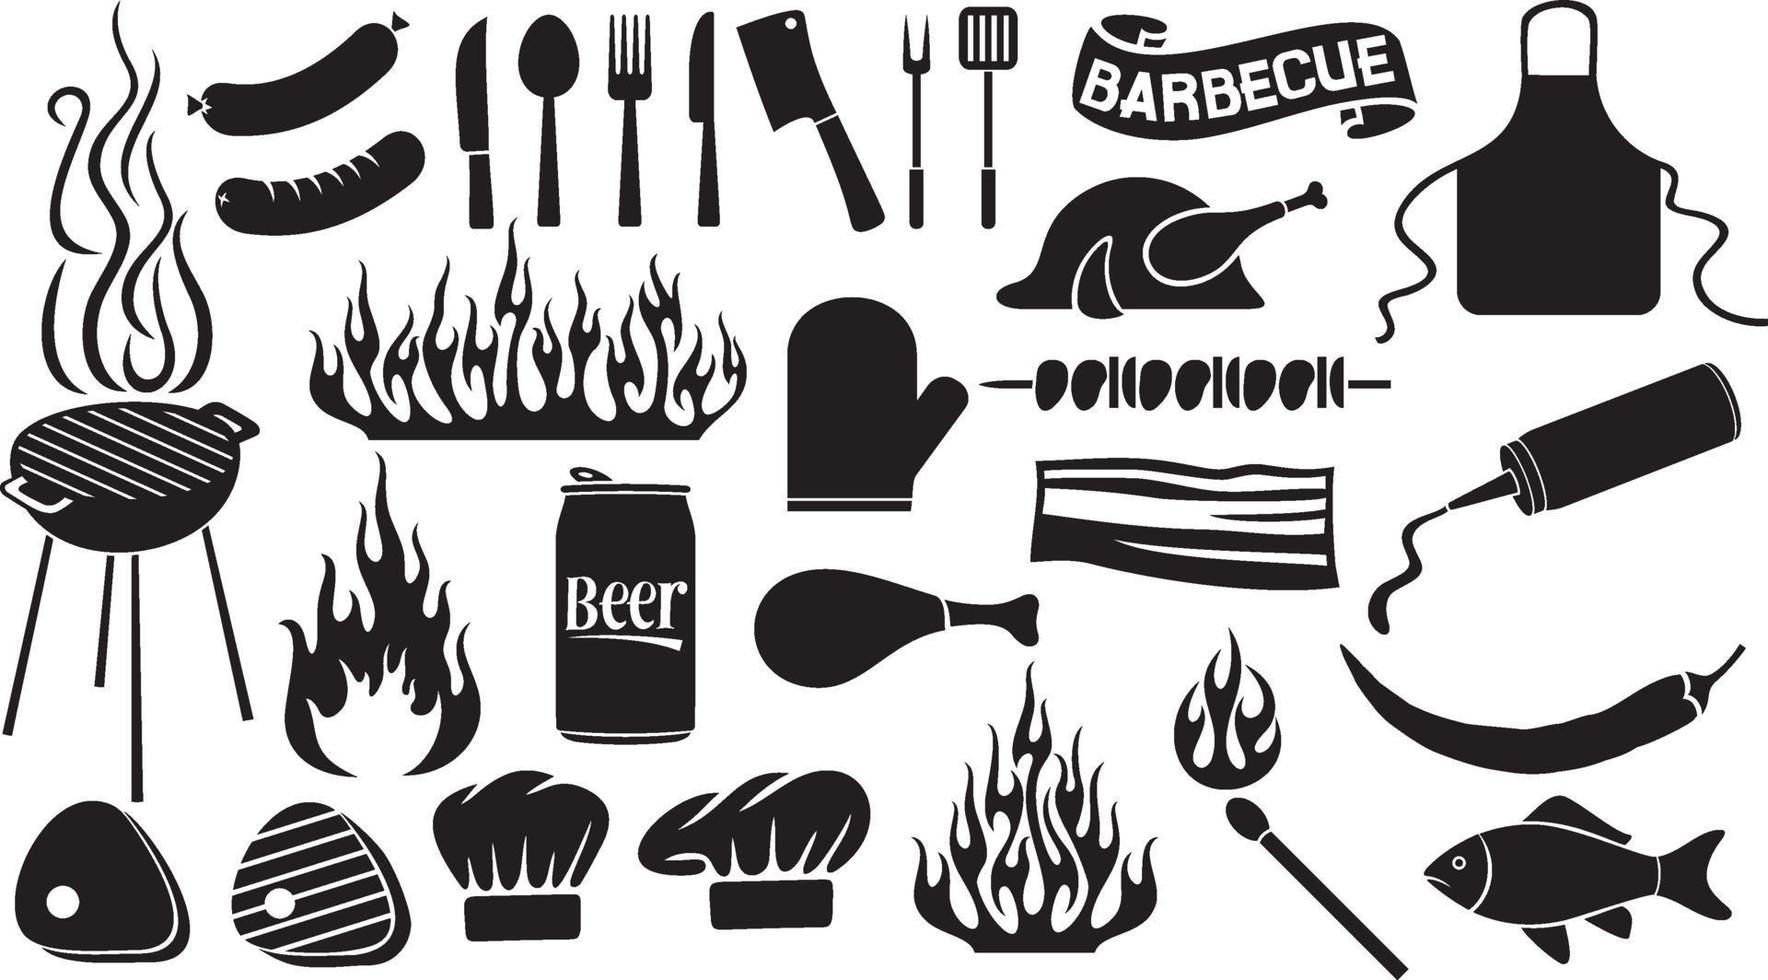 barbecue and food icons set vector